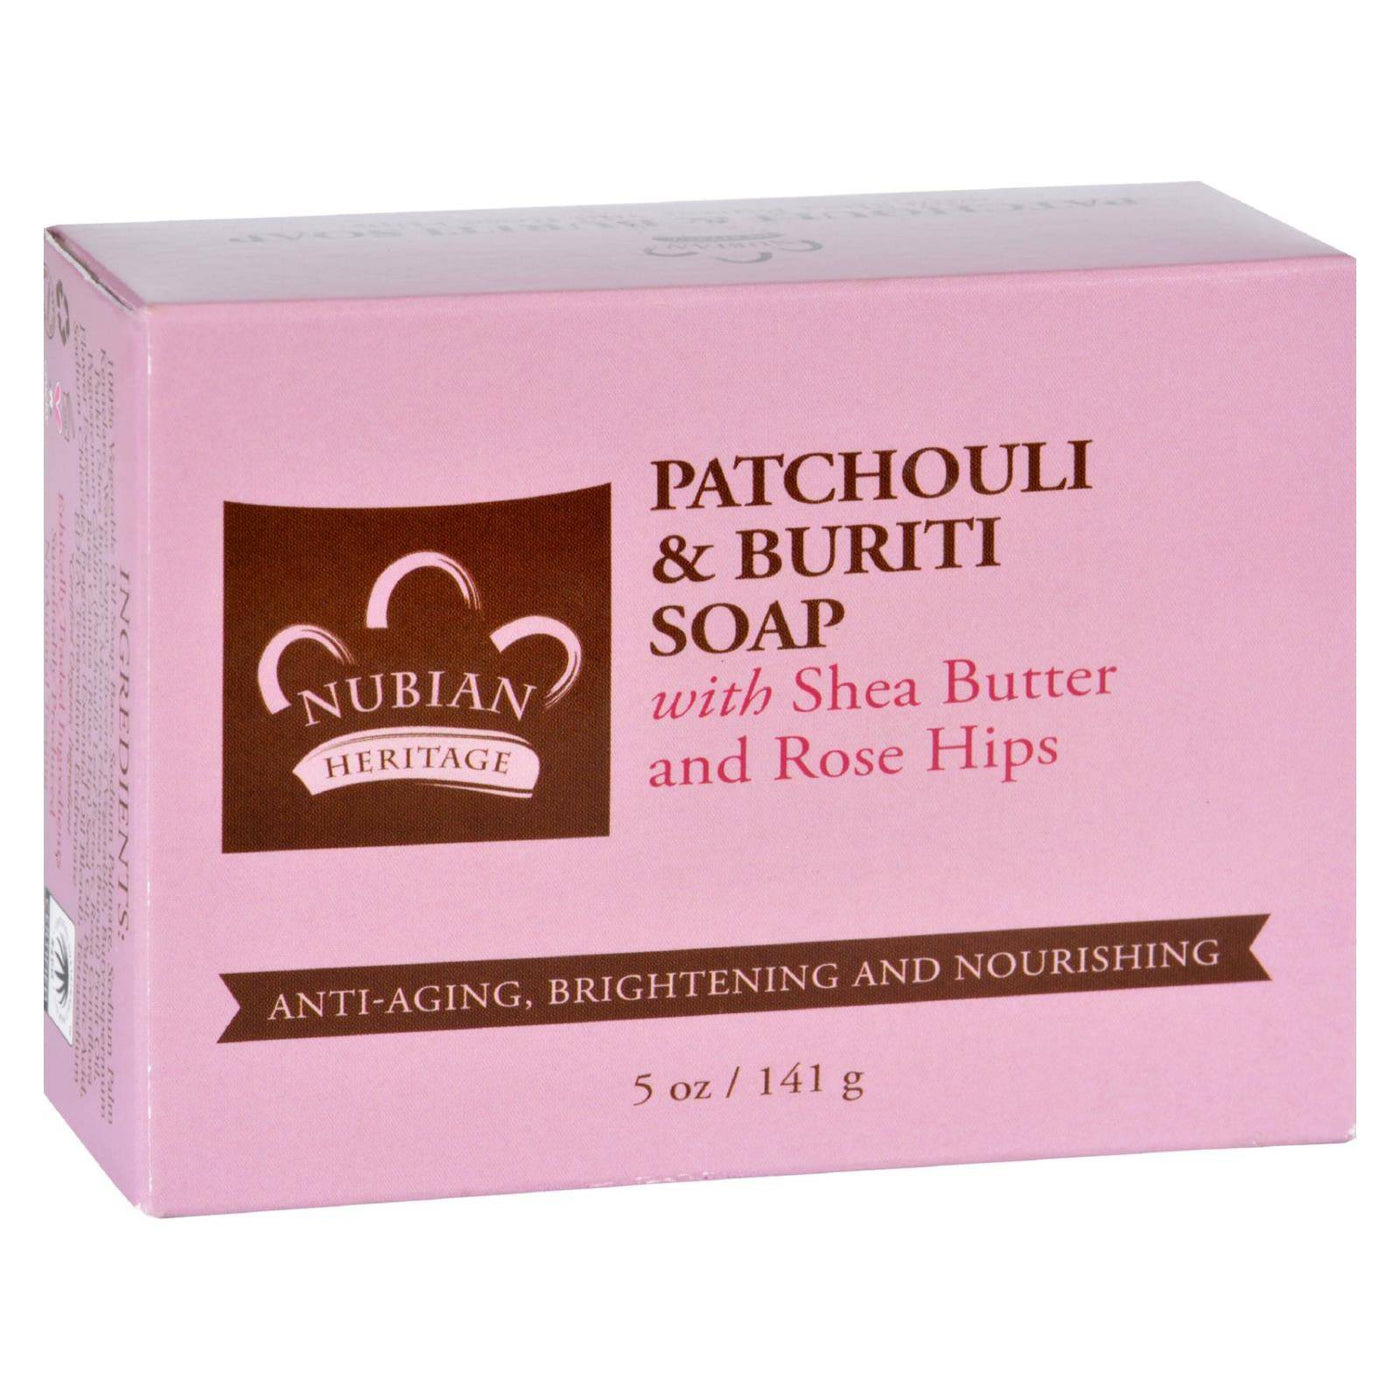 Buy Nubian Heritage Bar Soap - Patchouli And Buriti - 5 Oz  at OnlyNaturals.us